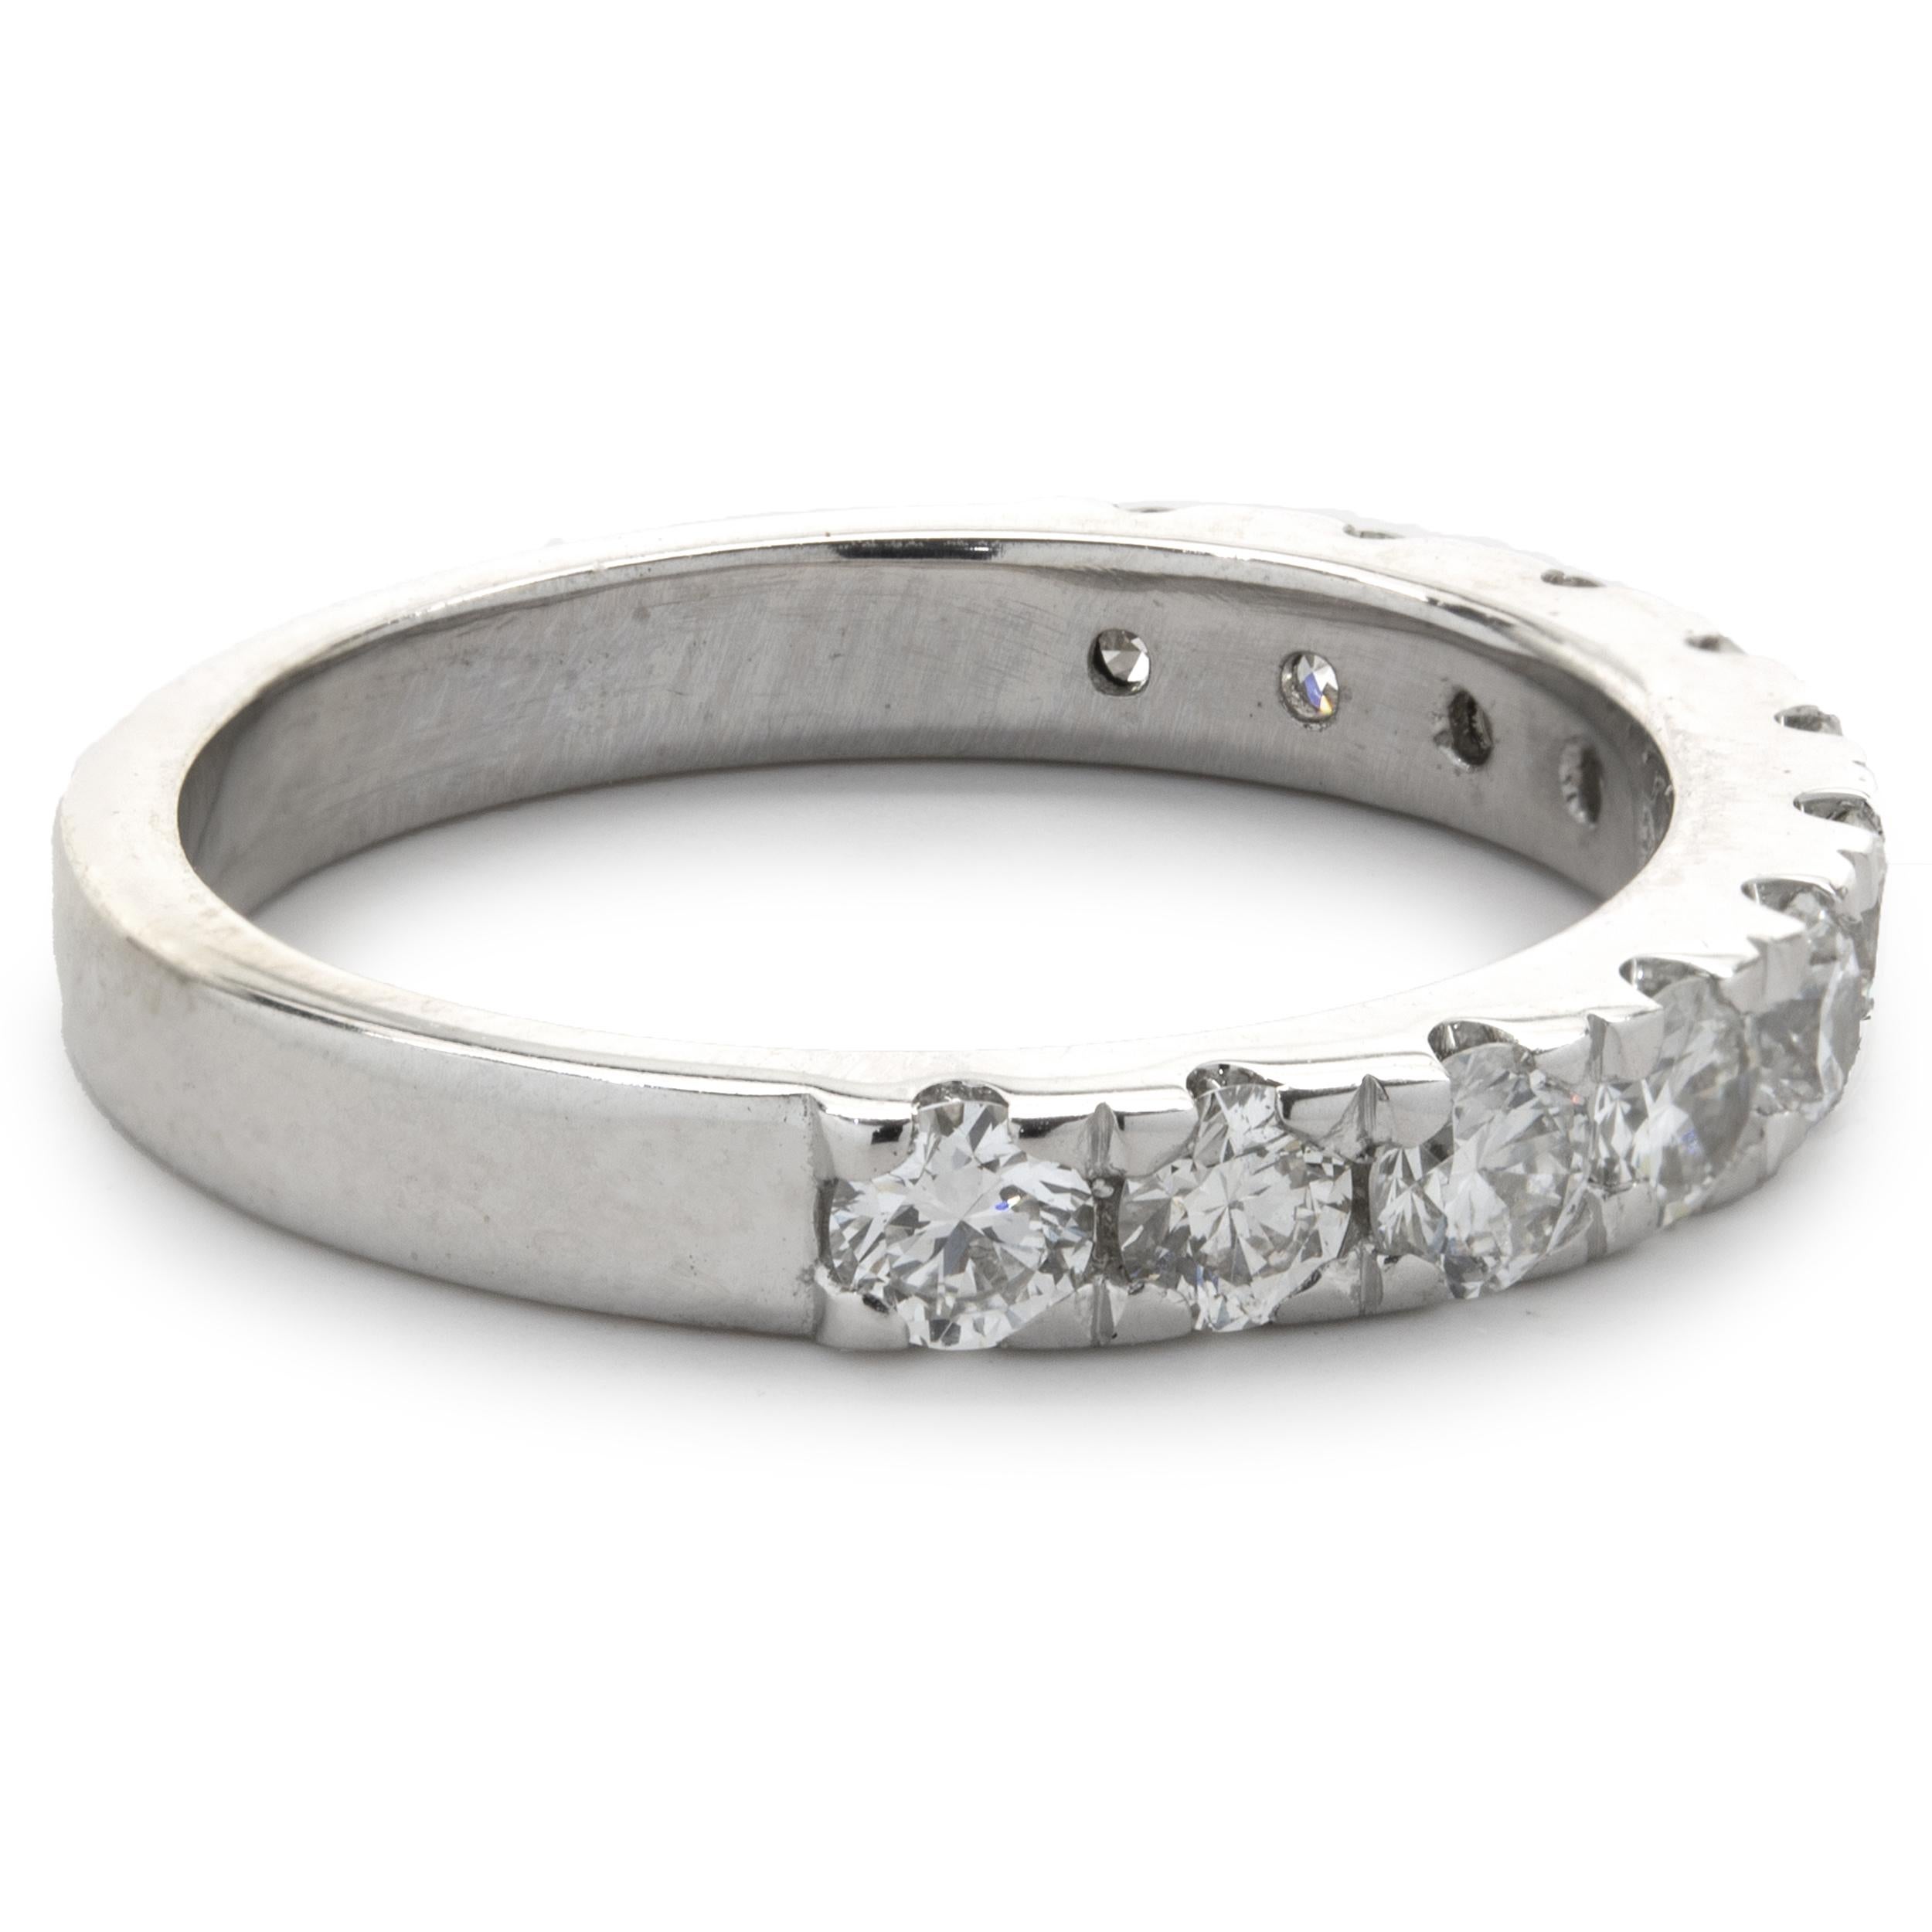 Designer: custom
Material: 14K white gold
Diamond: 11 round brilliant cut = 0.80cttw
Color: G
Clarity: SI1
Ring size: 5.25 (please allow two additional shipping days for sizing requests)
Weight: 2.63 grams
